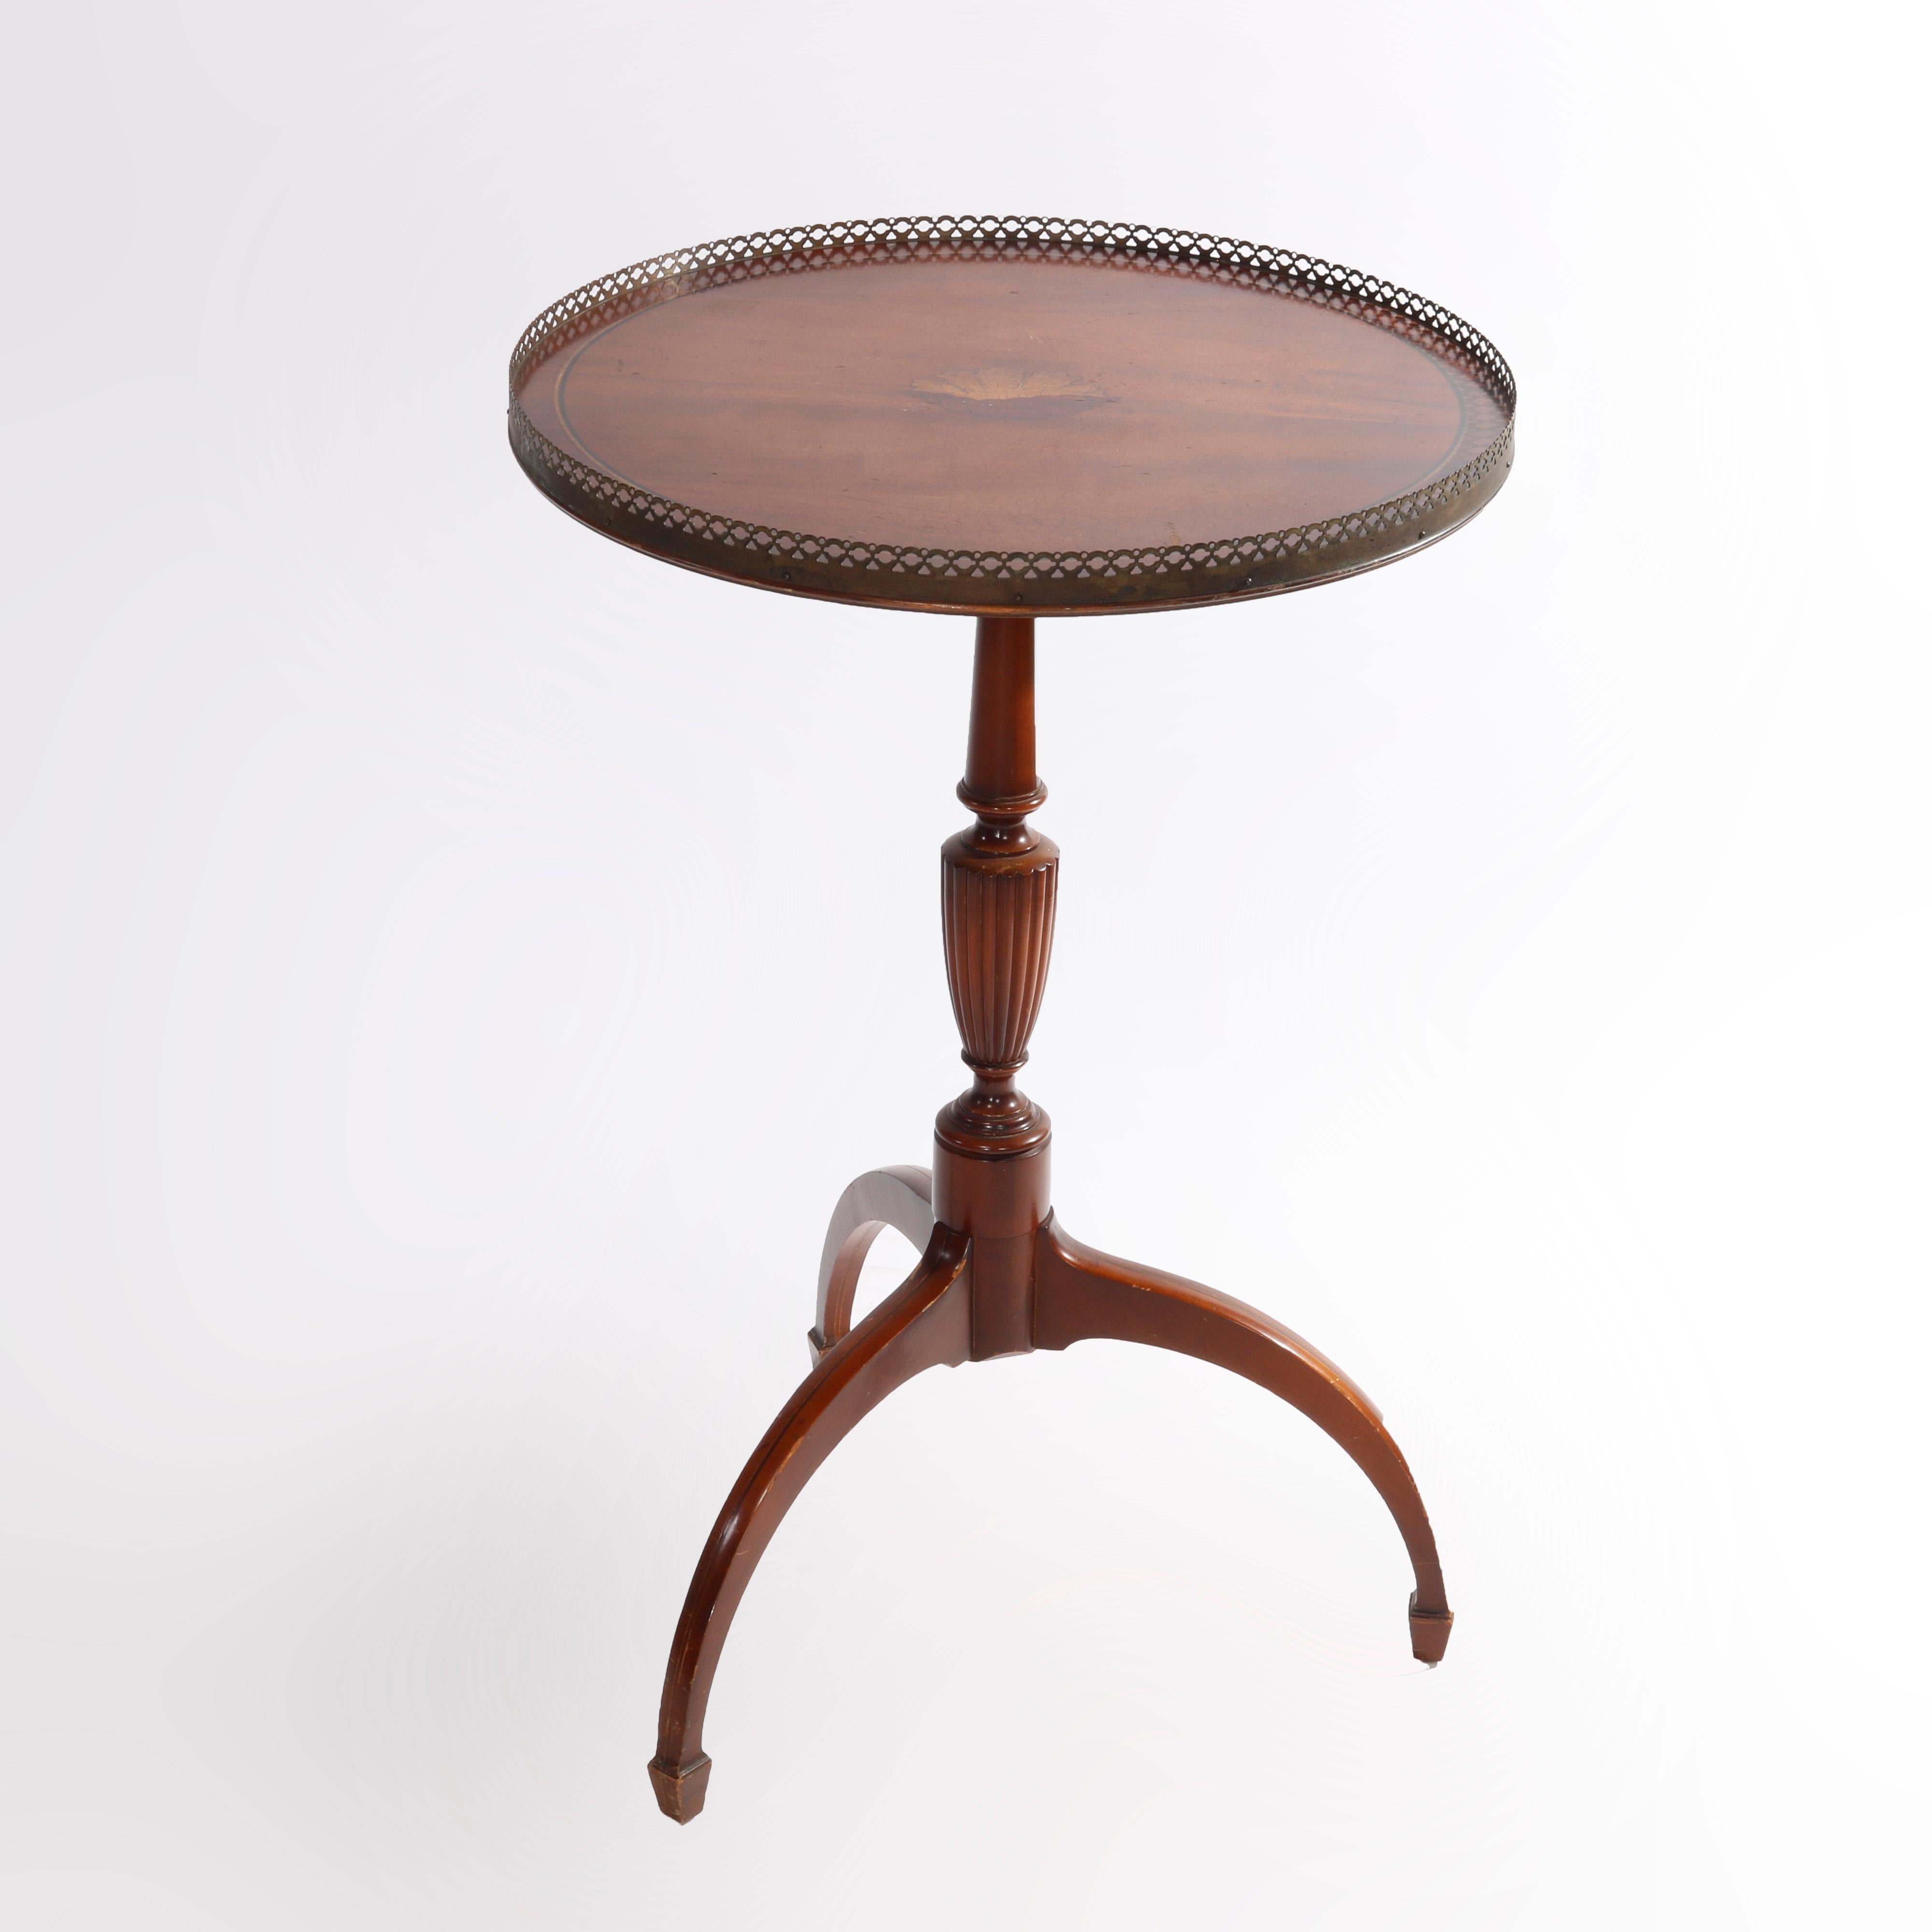 An antique English Regency parlor table offers mahogany construction with top having pierced brass gallery and center inlaid shell raised on column with reeded urn form element and spider legs with spade feet, c1930

Measures- 29